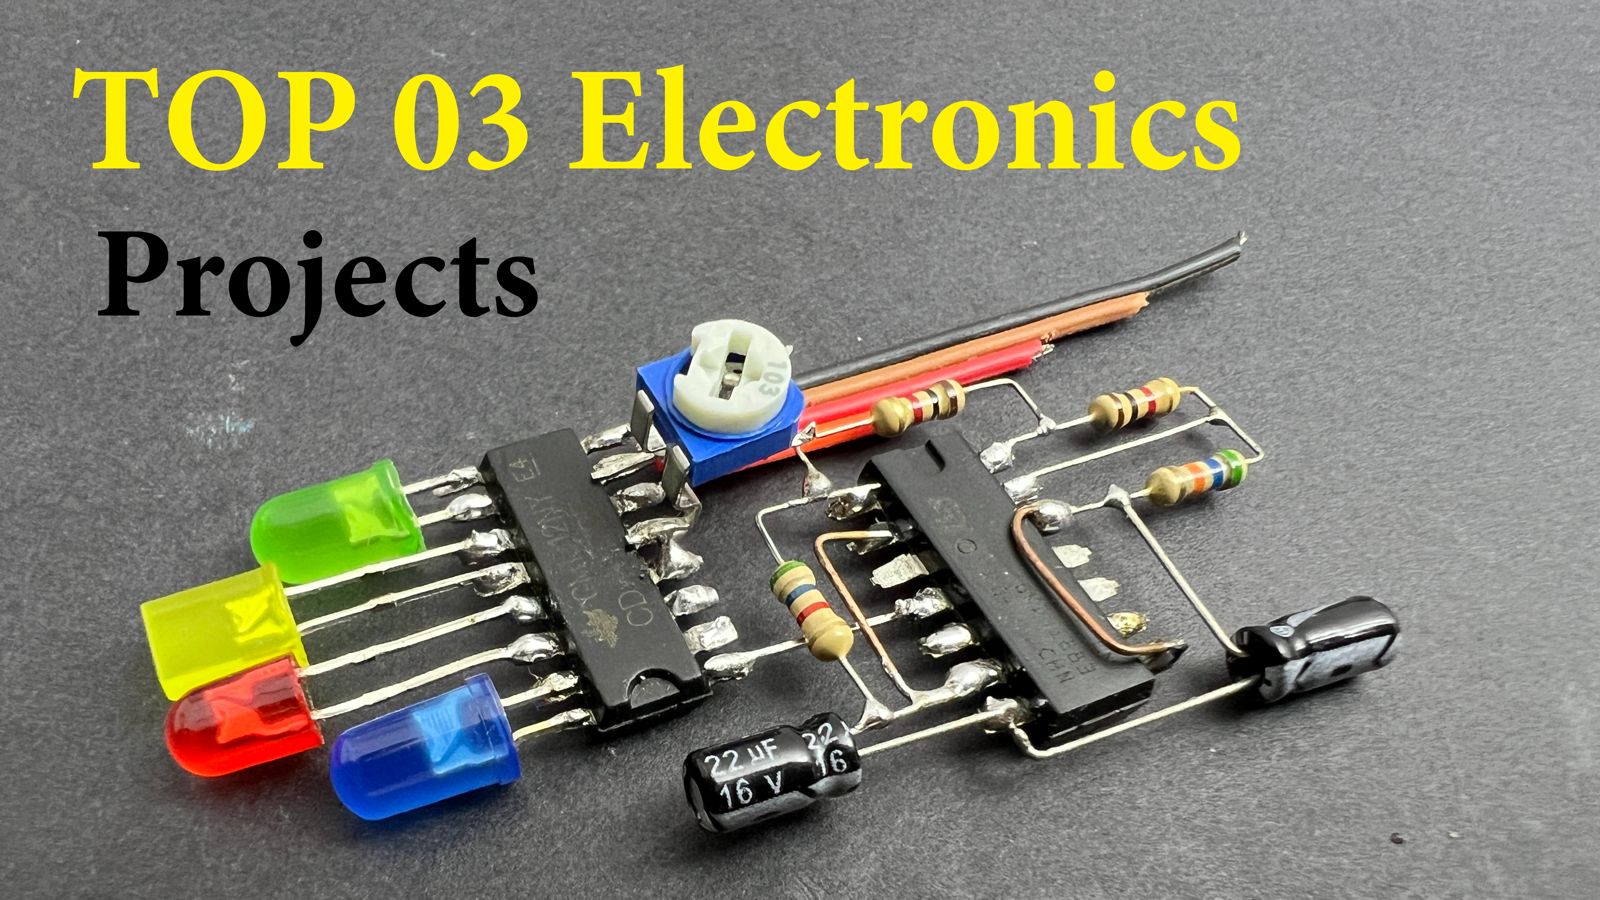 Top 03 Electronics Projects